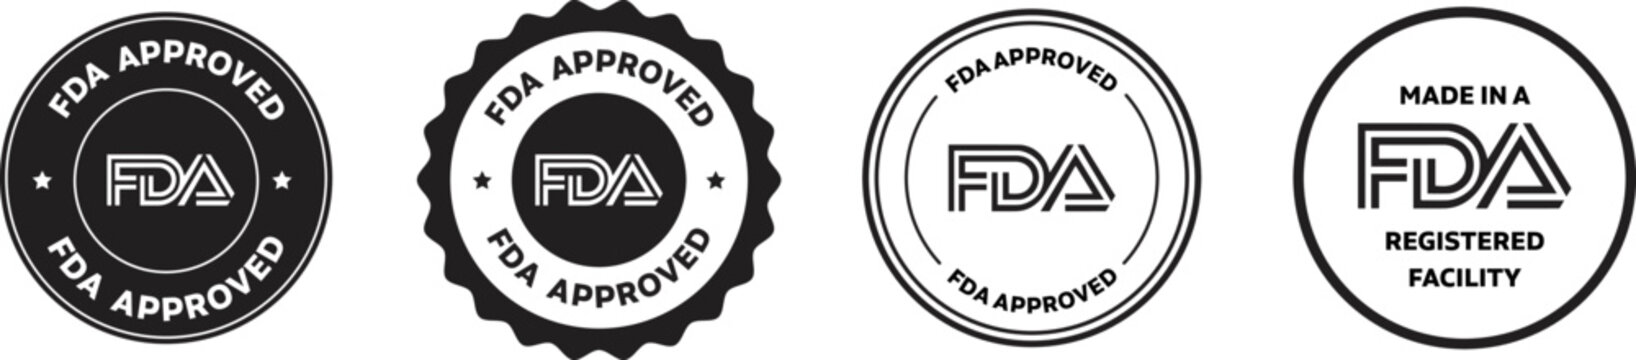 FDA Approved Rounded vector icon illustration